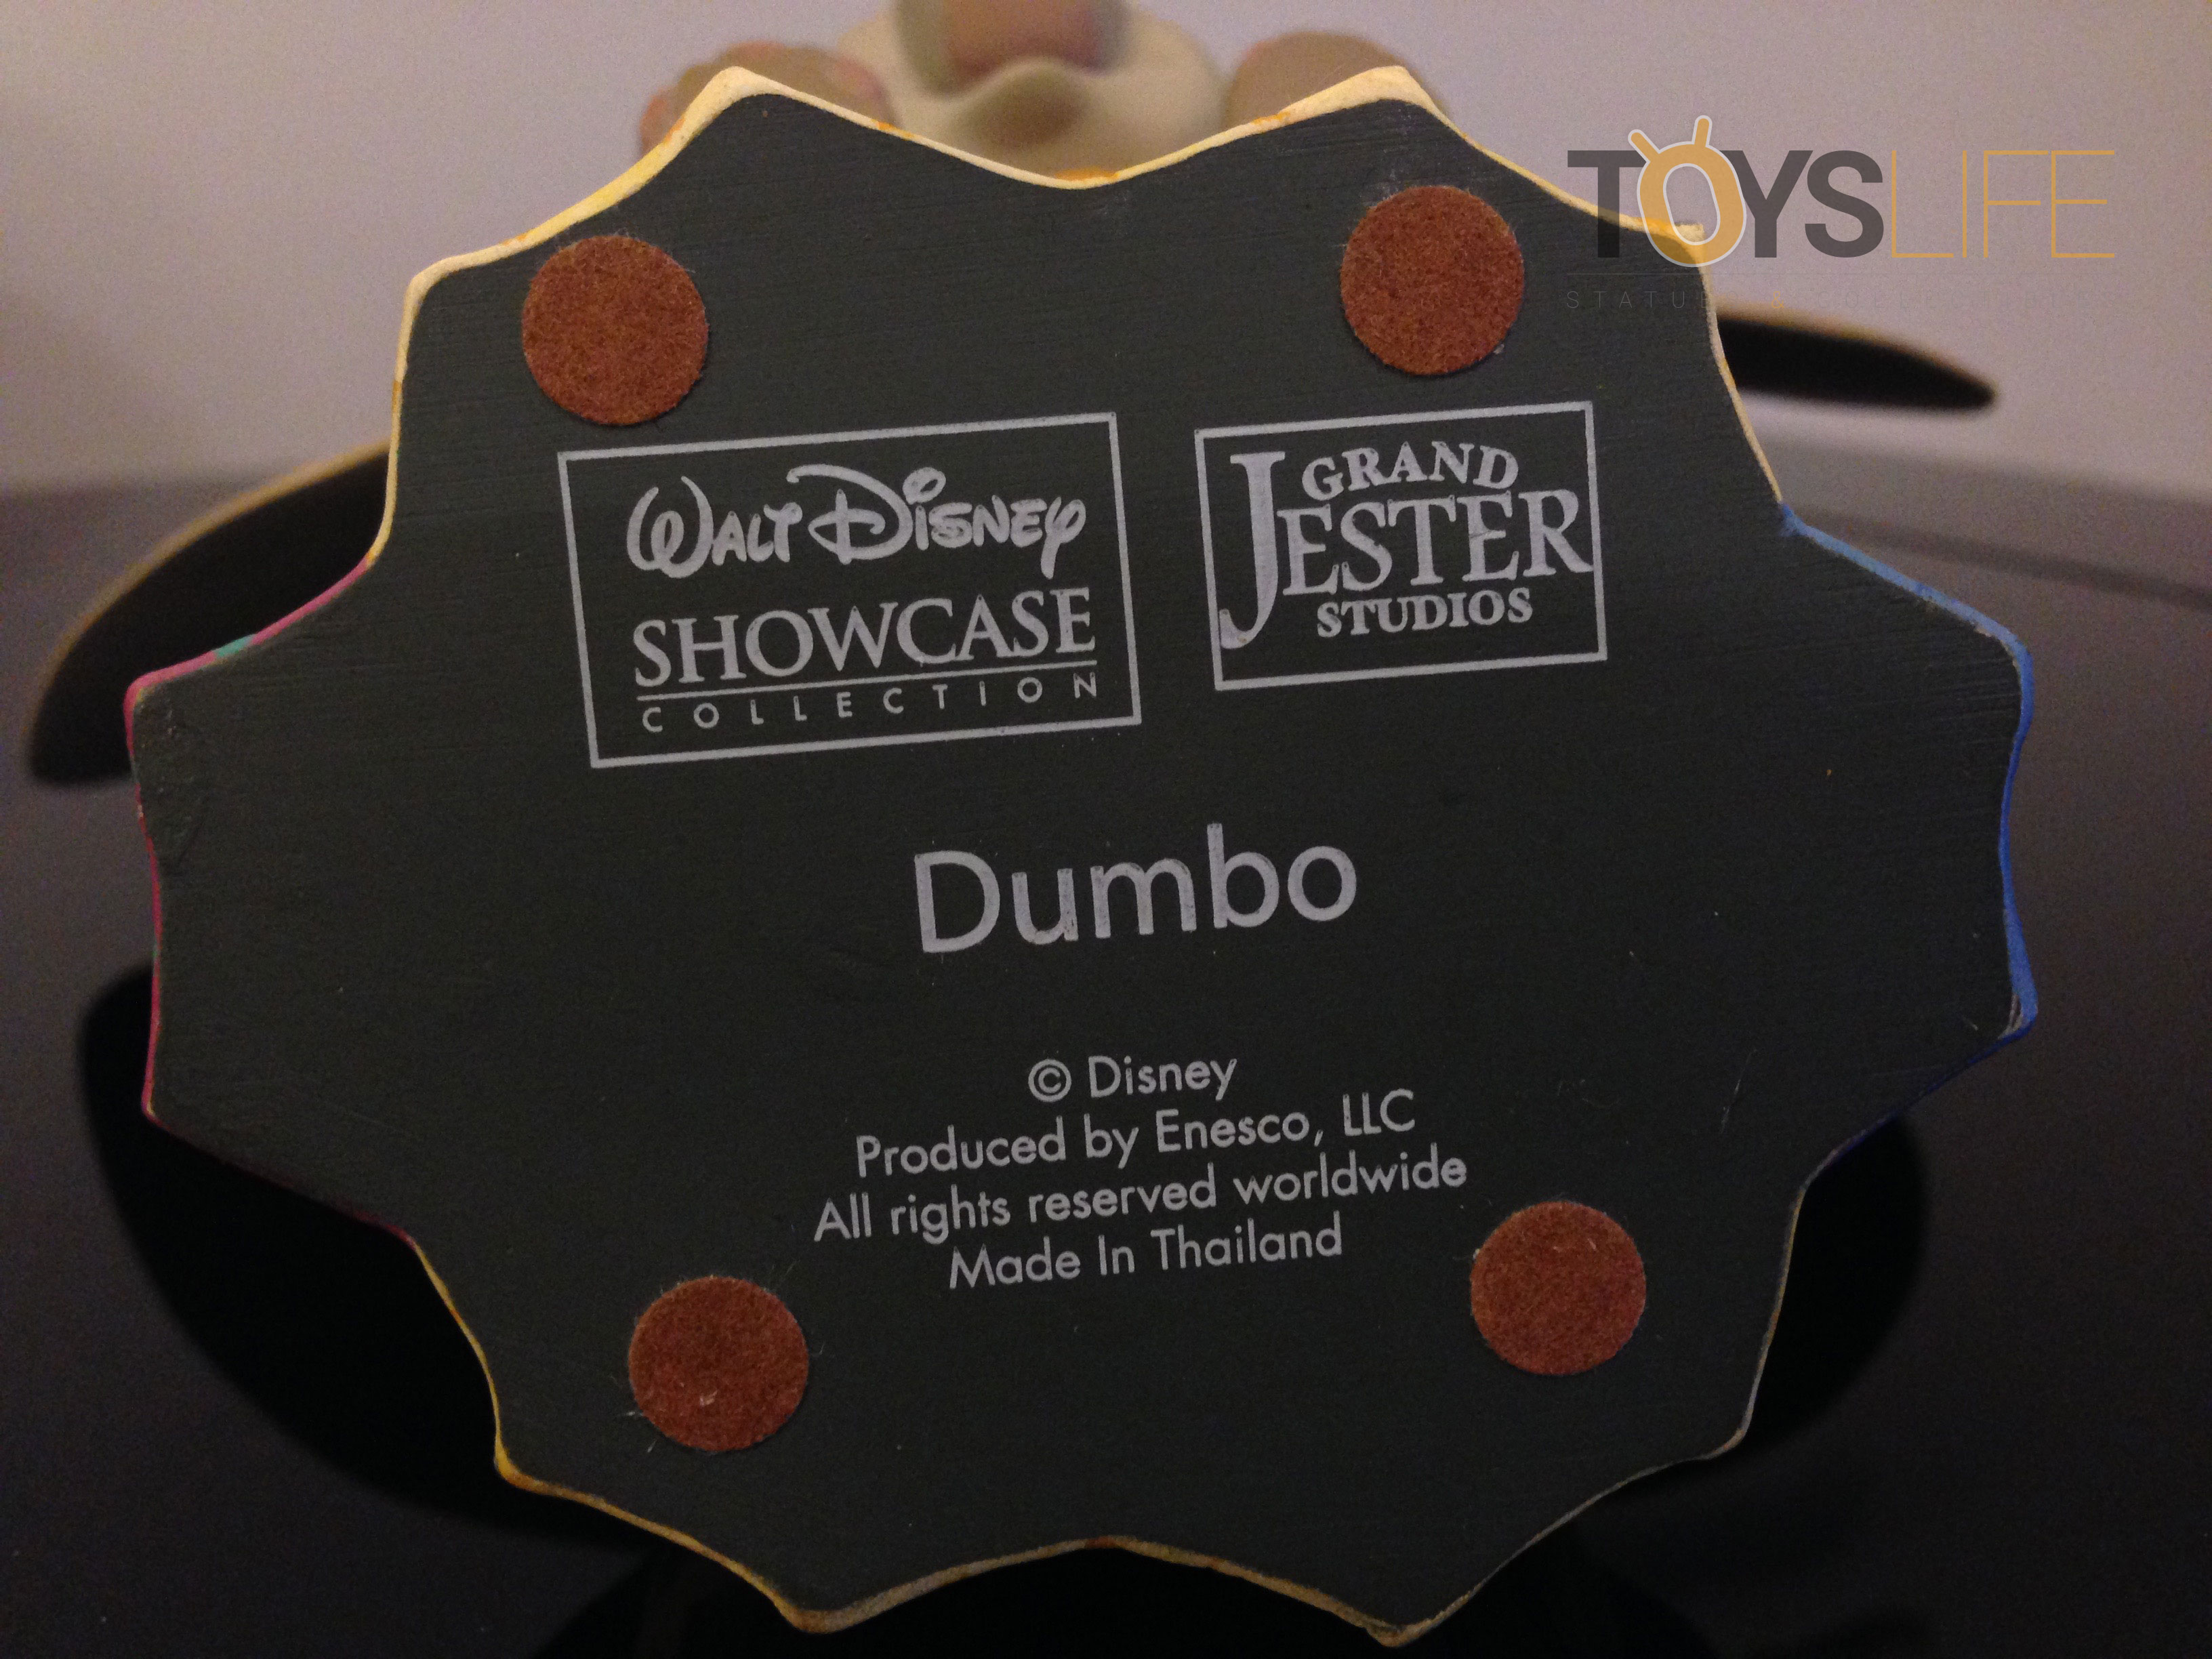 grand-jester-studios-dumbo-bust-toyslife-review-06